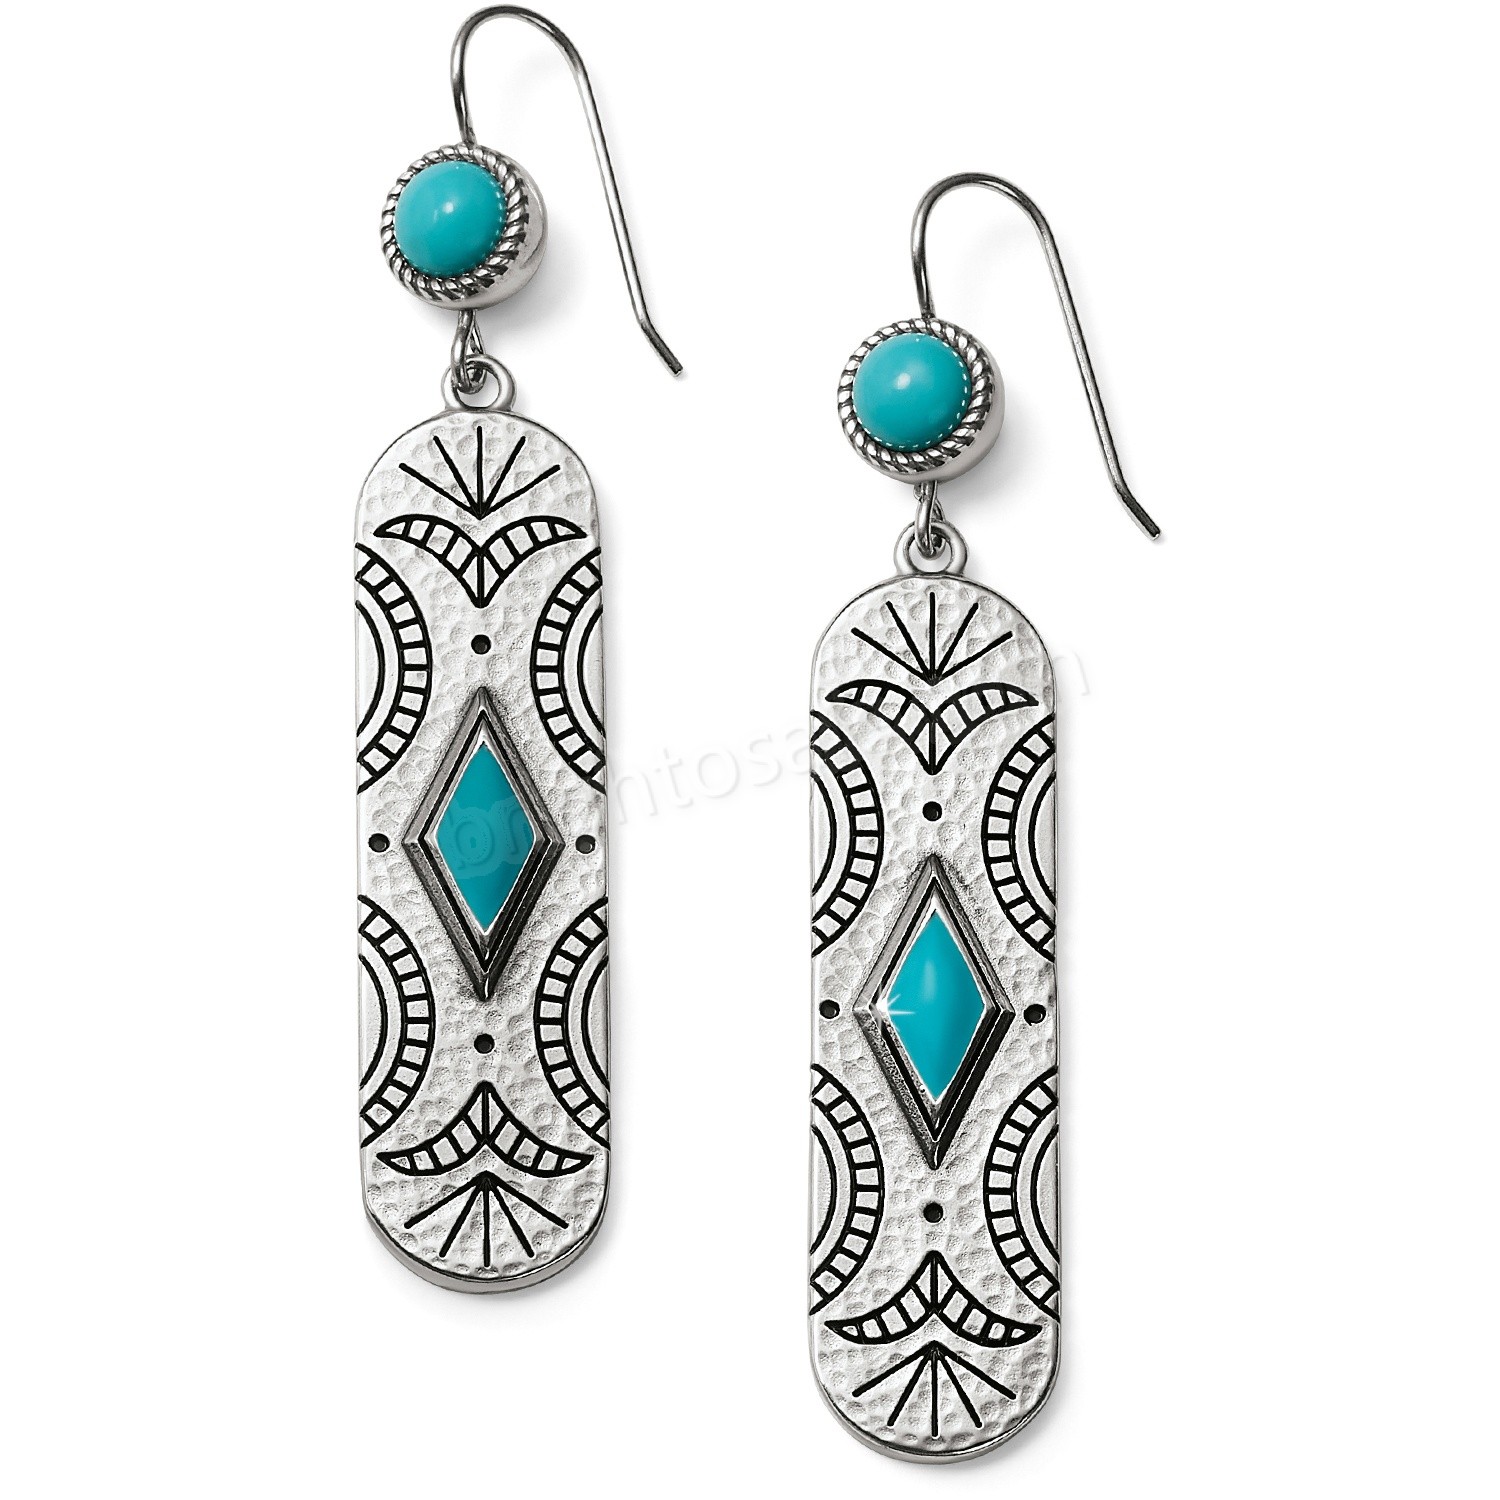 Brighton Collectibles & Online Discount Southwest Dream French Wire Earrings - Brighton Collectibles & Online Discount Southwest Dream French Wire Earrings